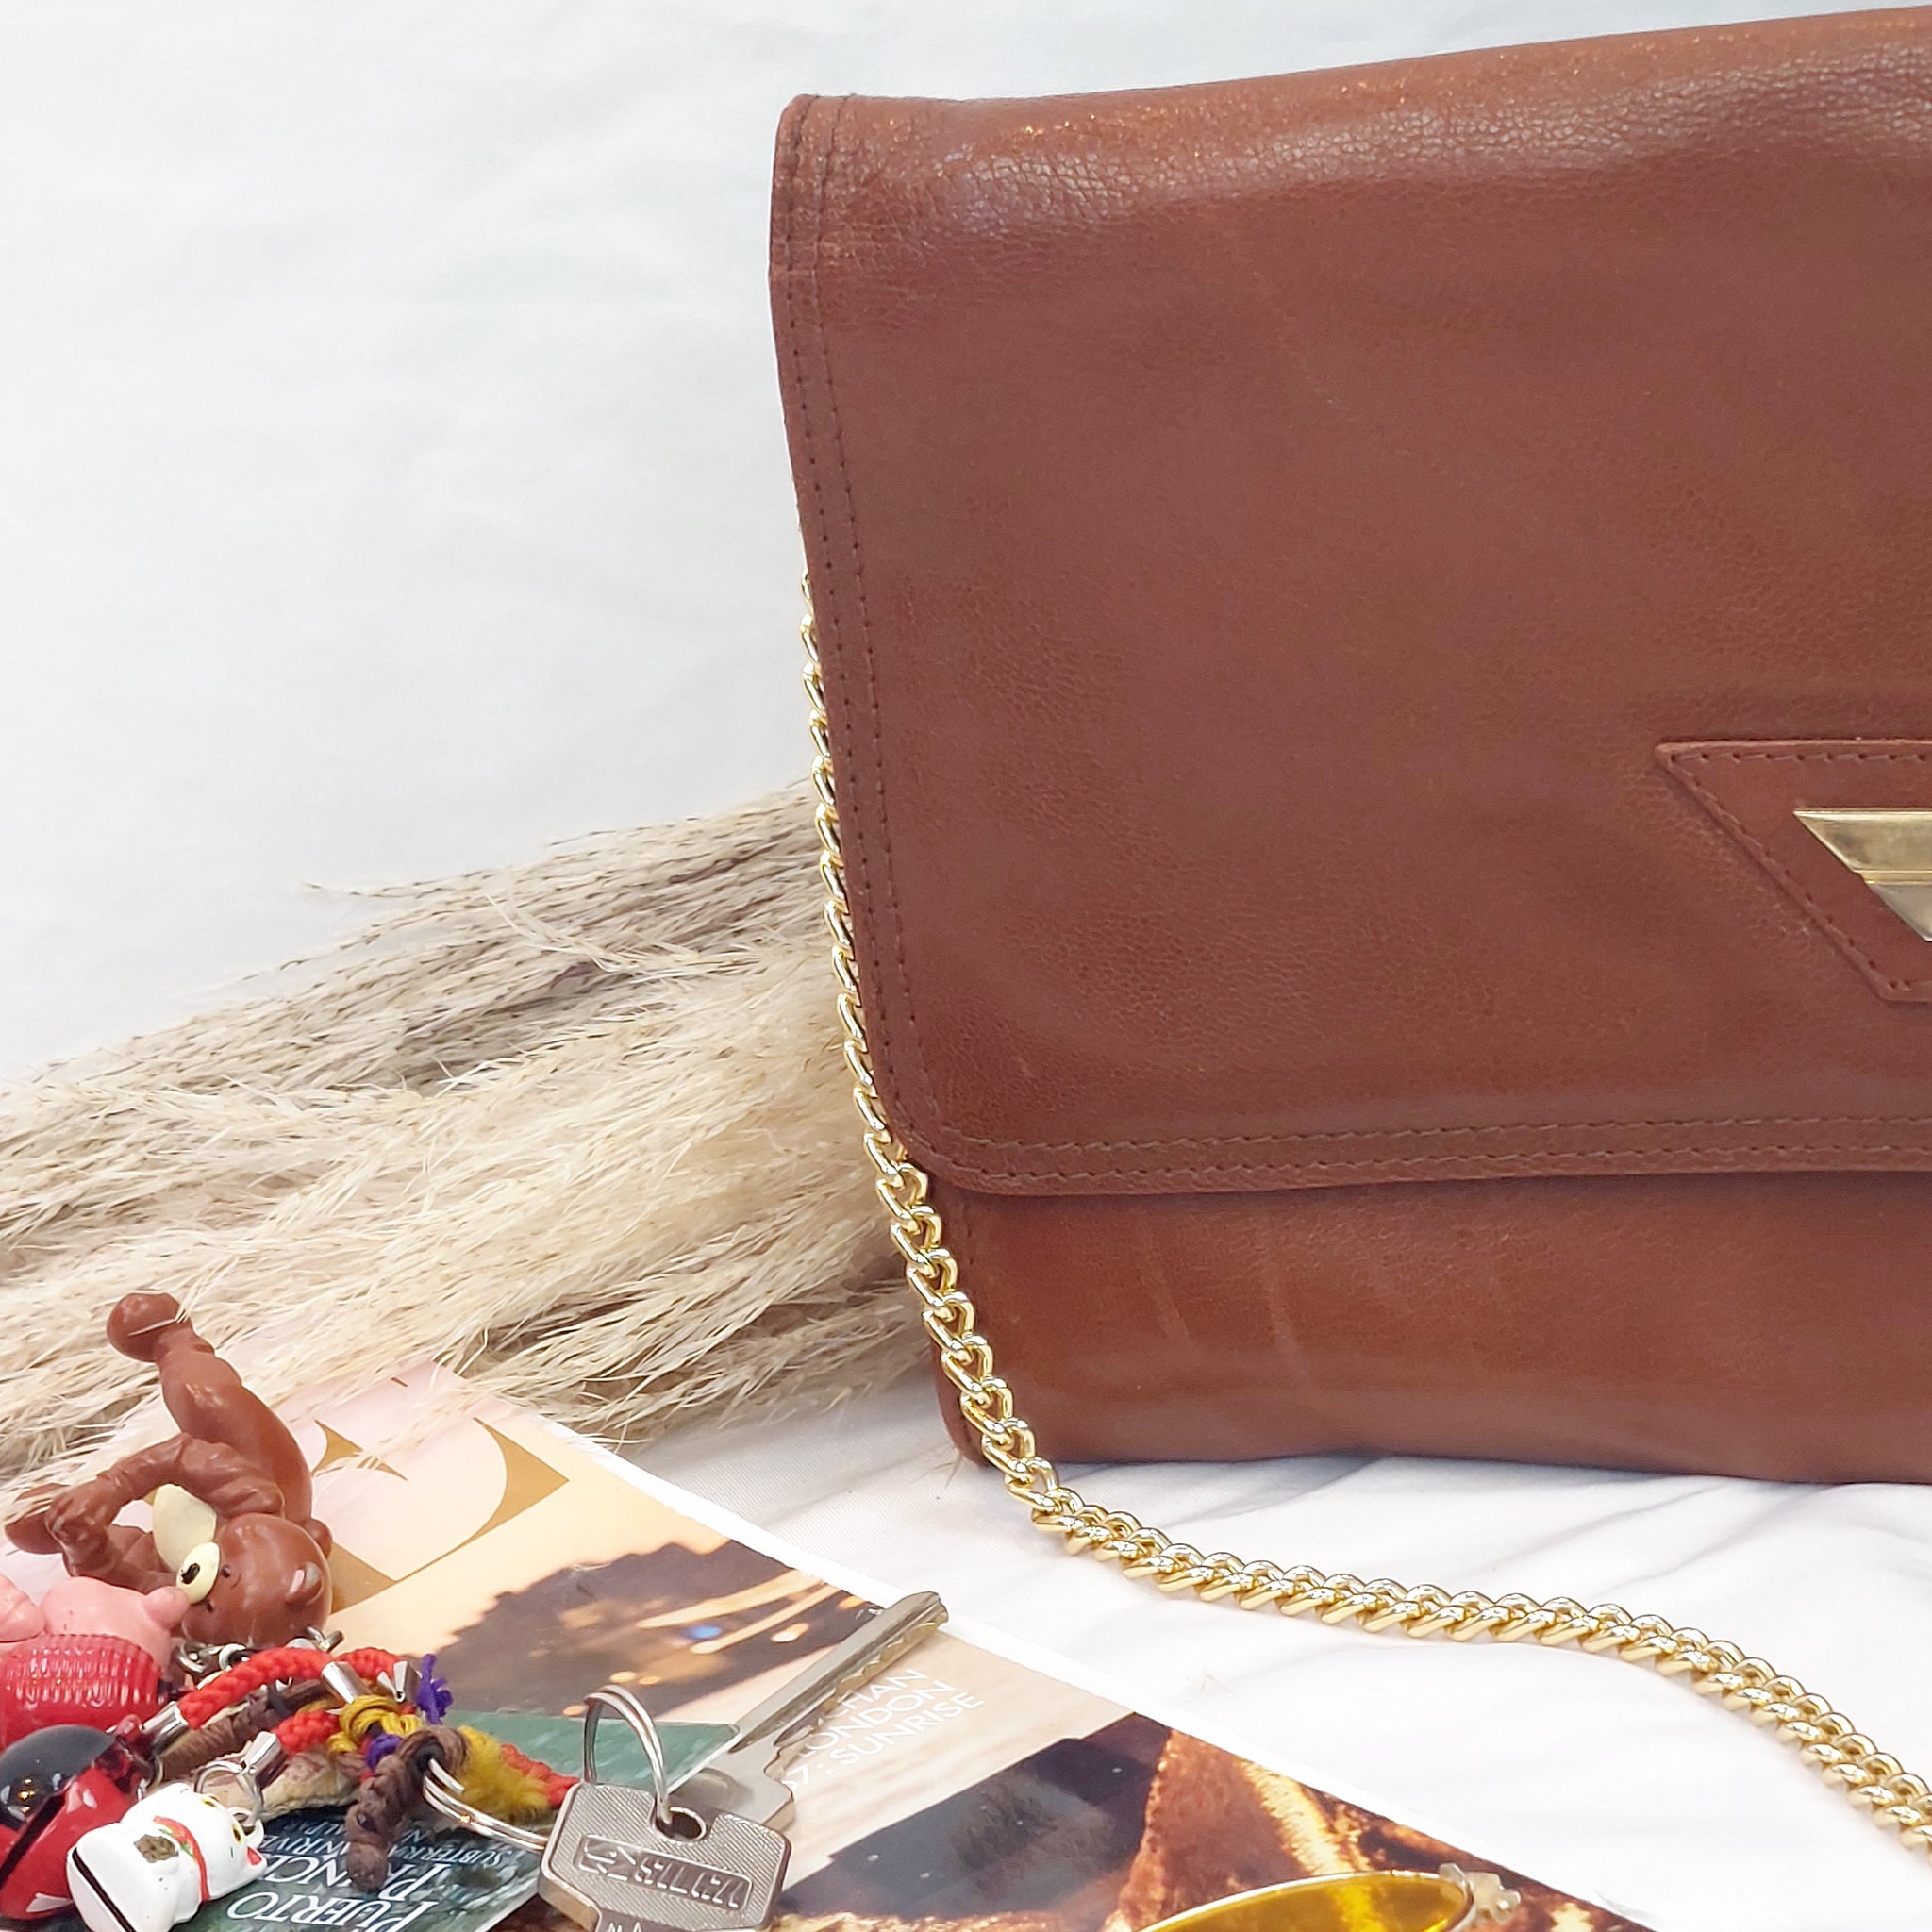 VINTAGE BROWN LEATHER CLUTCH